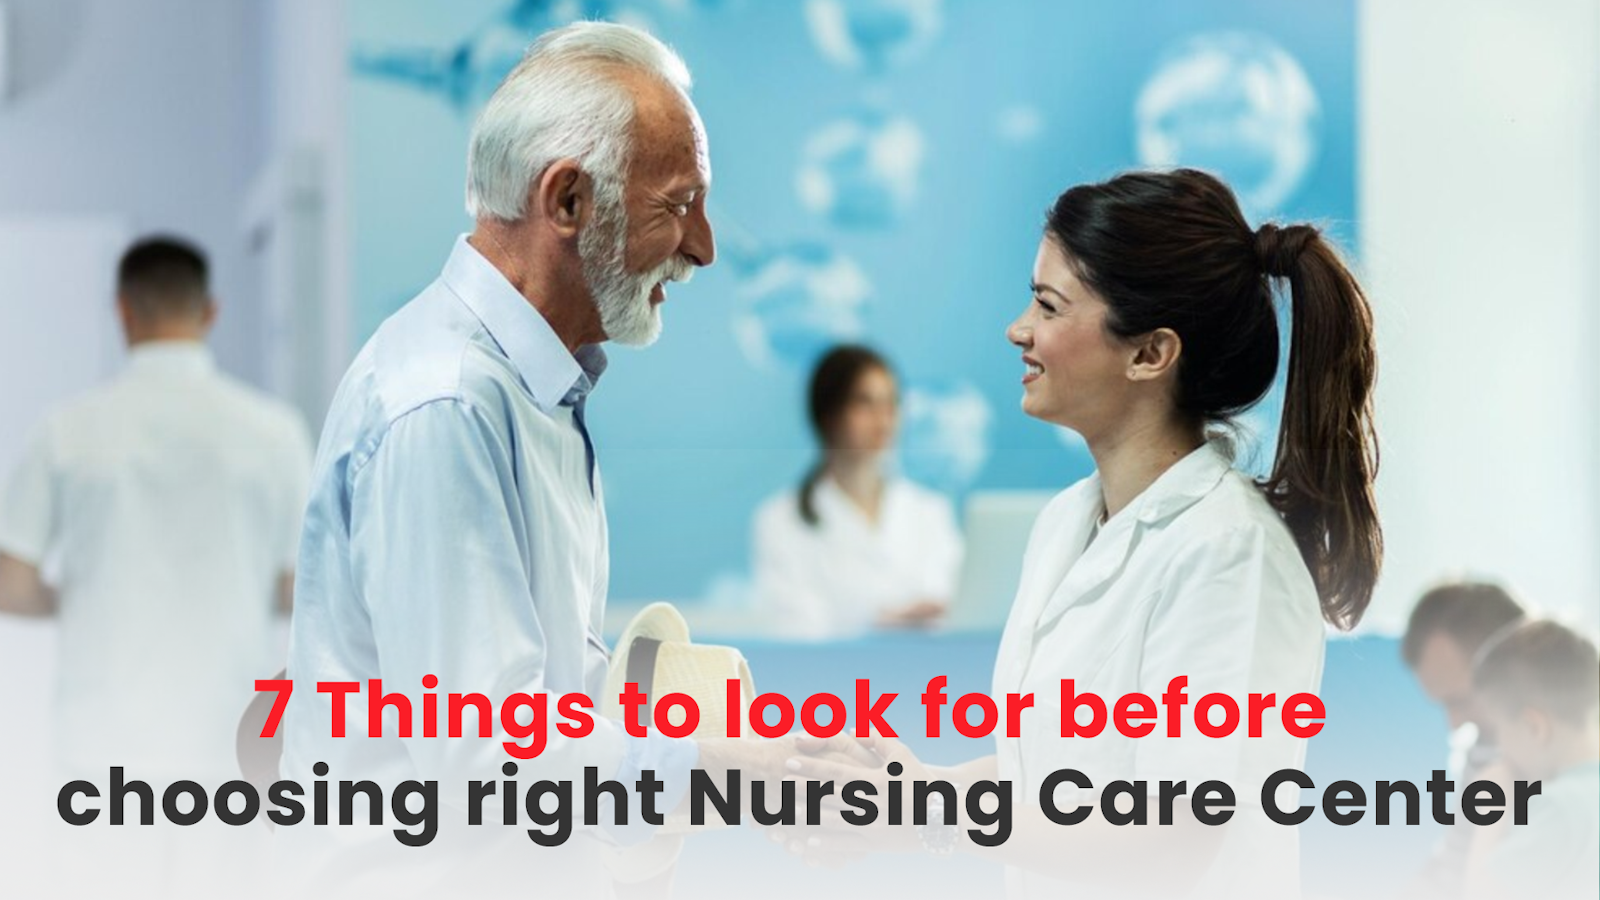 Things to look for before choosing right Nursing Care Center